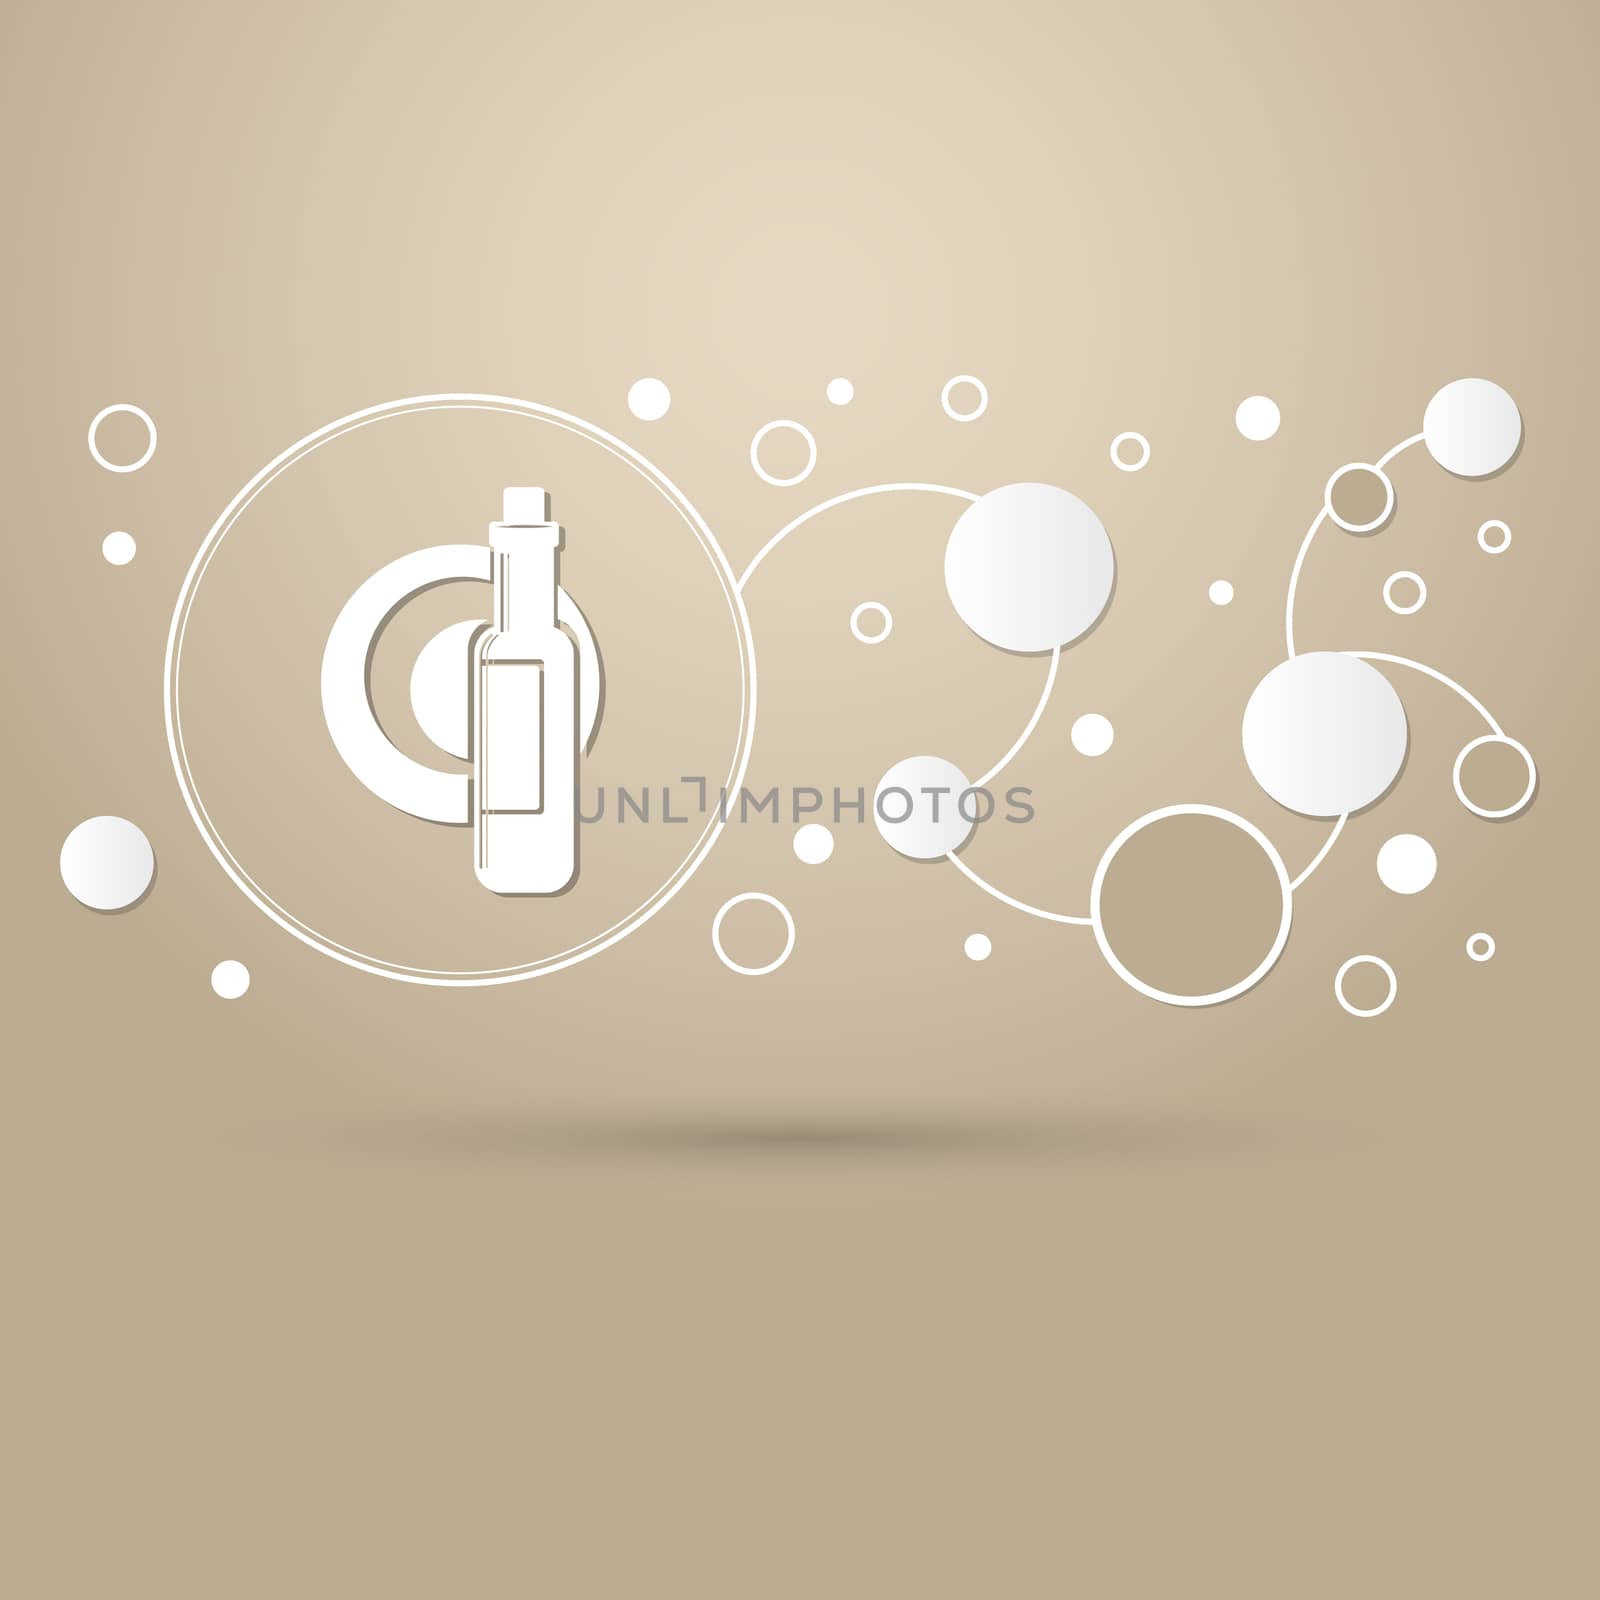 Beer, wine bottle on a brown background with elegant style and modern design infographic. illustration